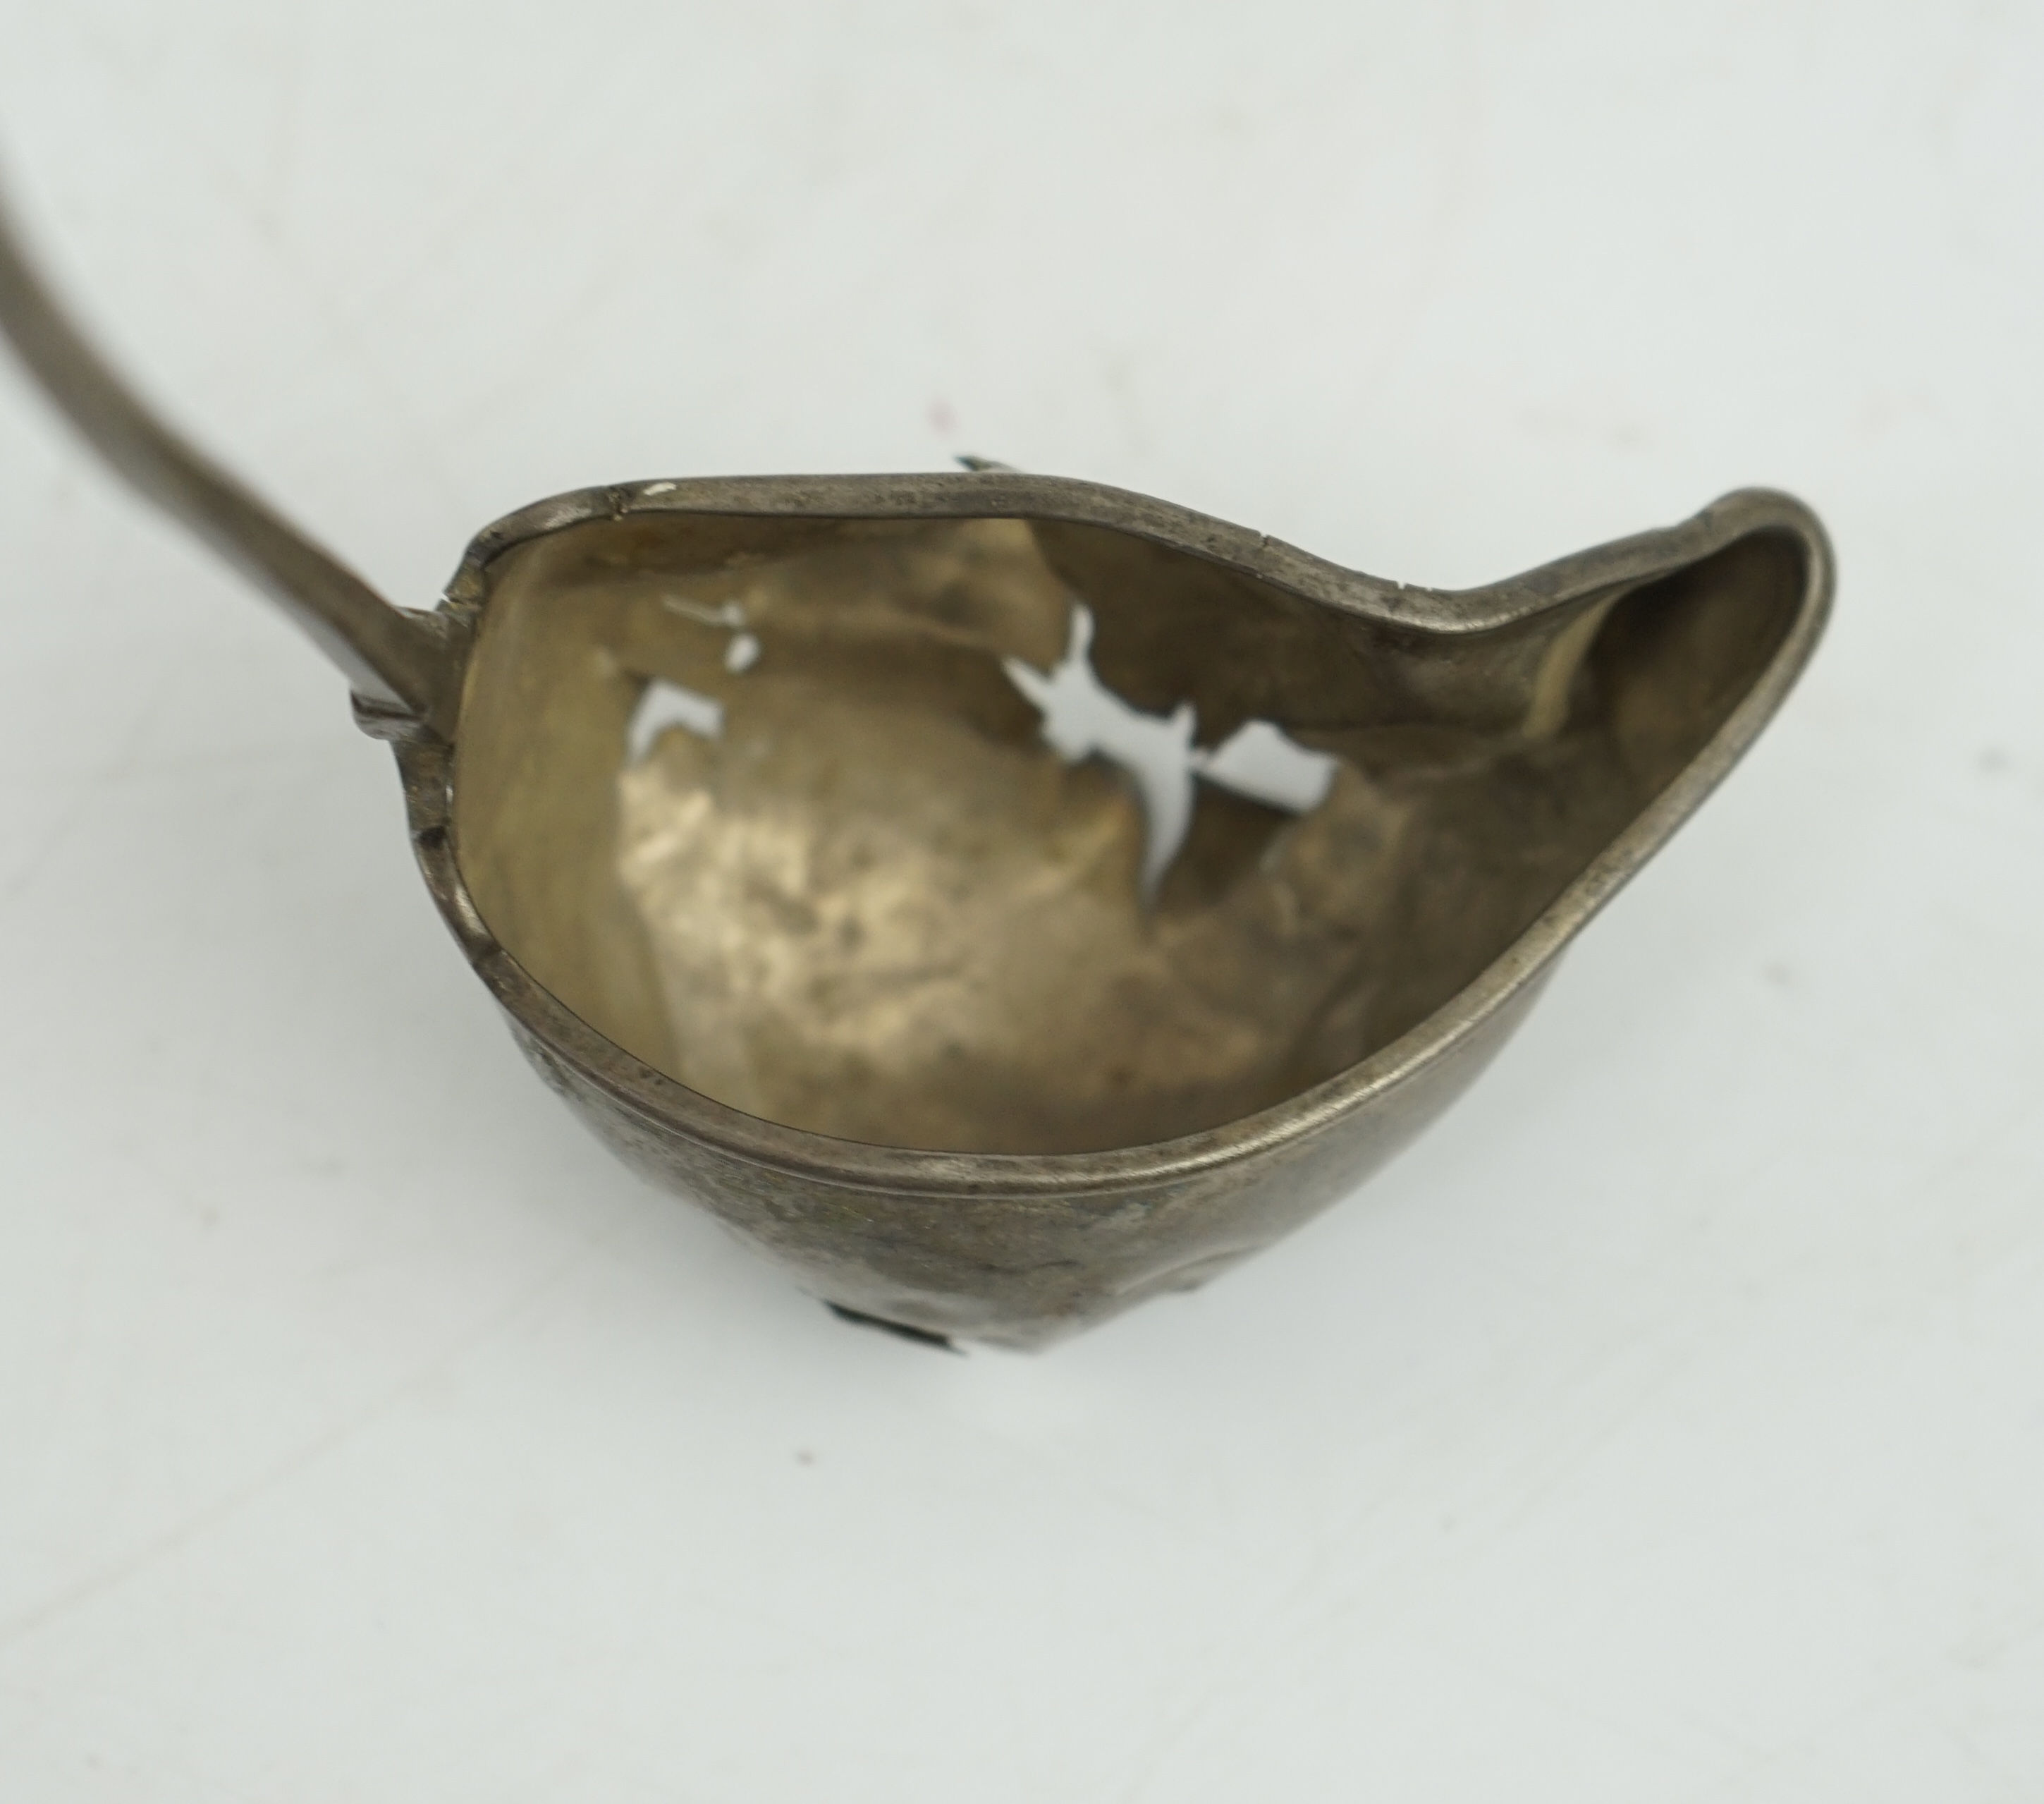 A silver ladle, Roman or Gandhara, c. late 1st century BC - early 1st century A.D.